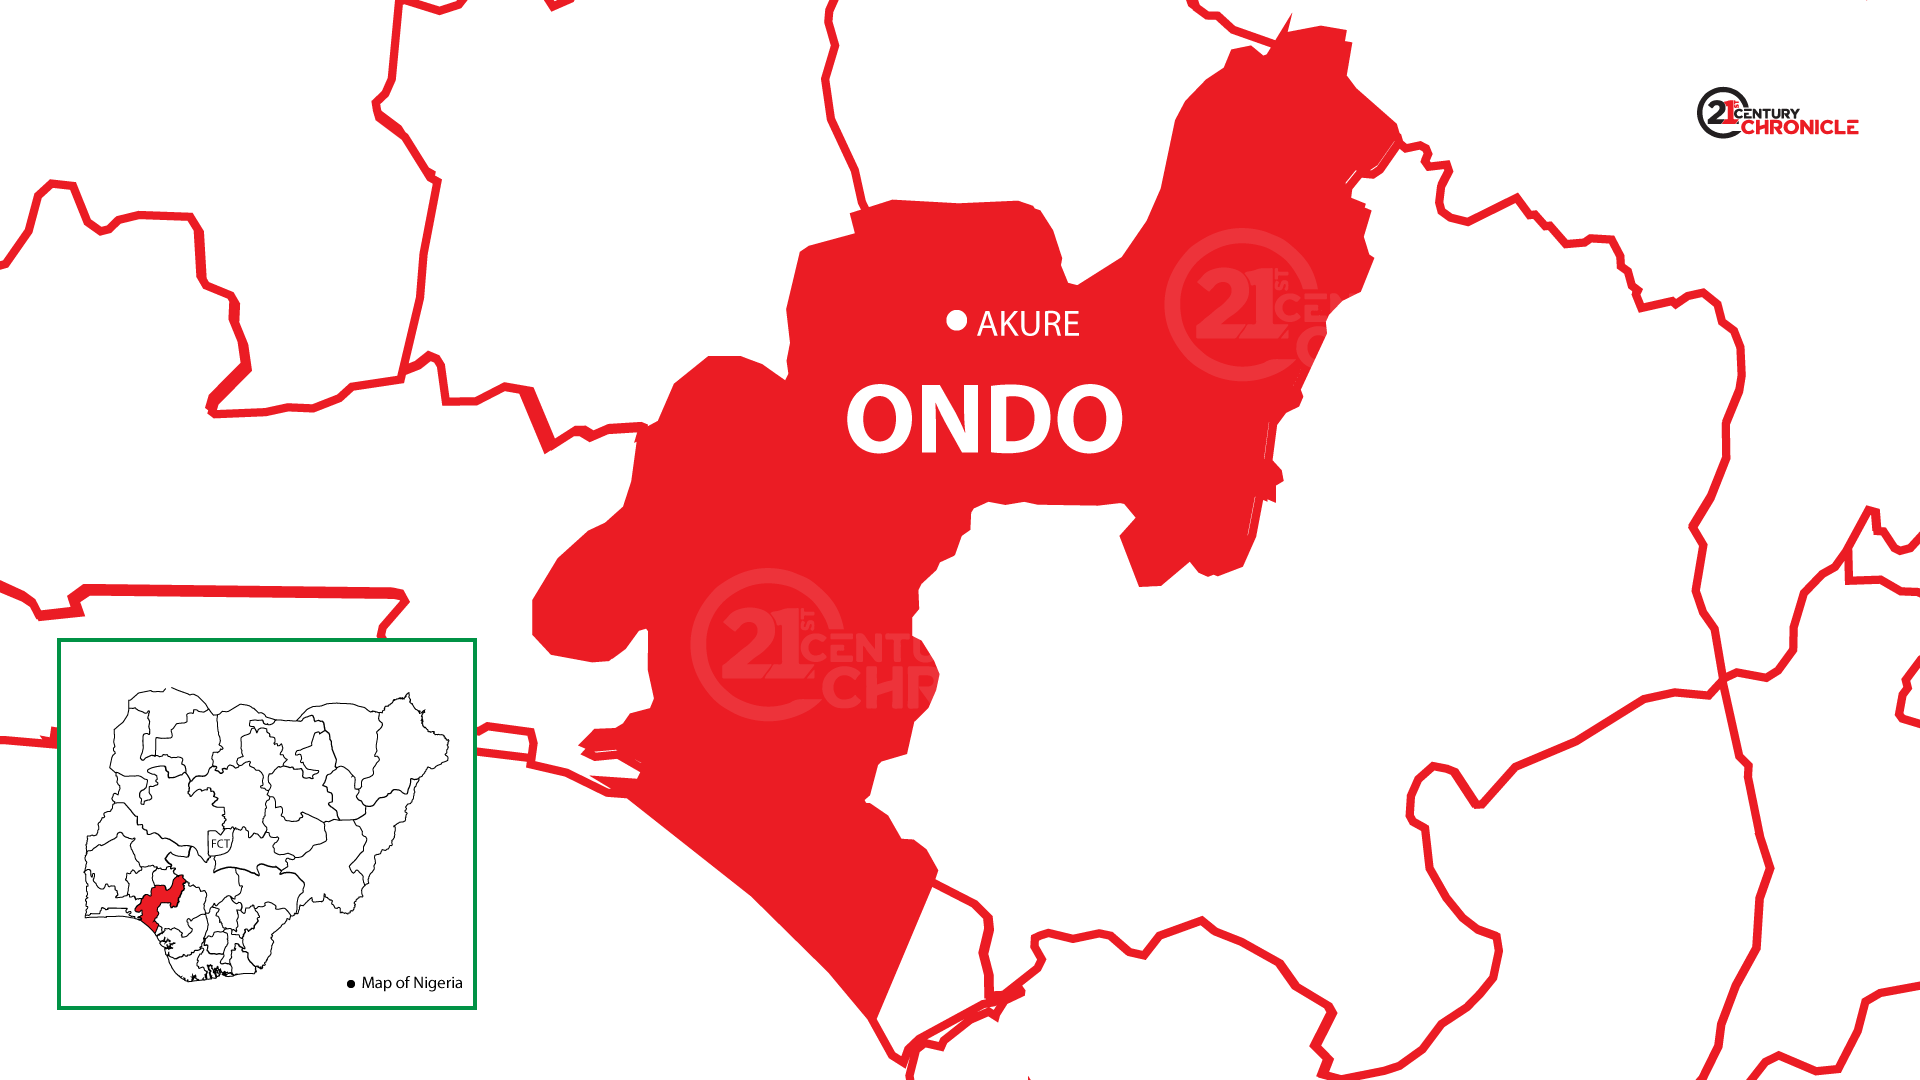 Over 50 Abducted Children Discovered In Ondo Church